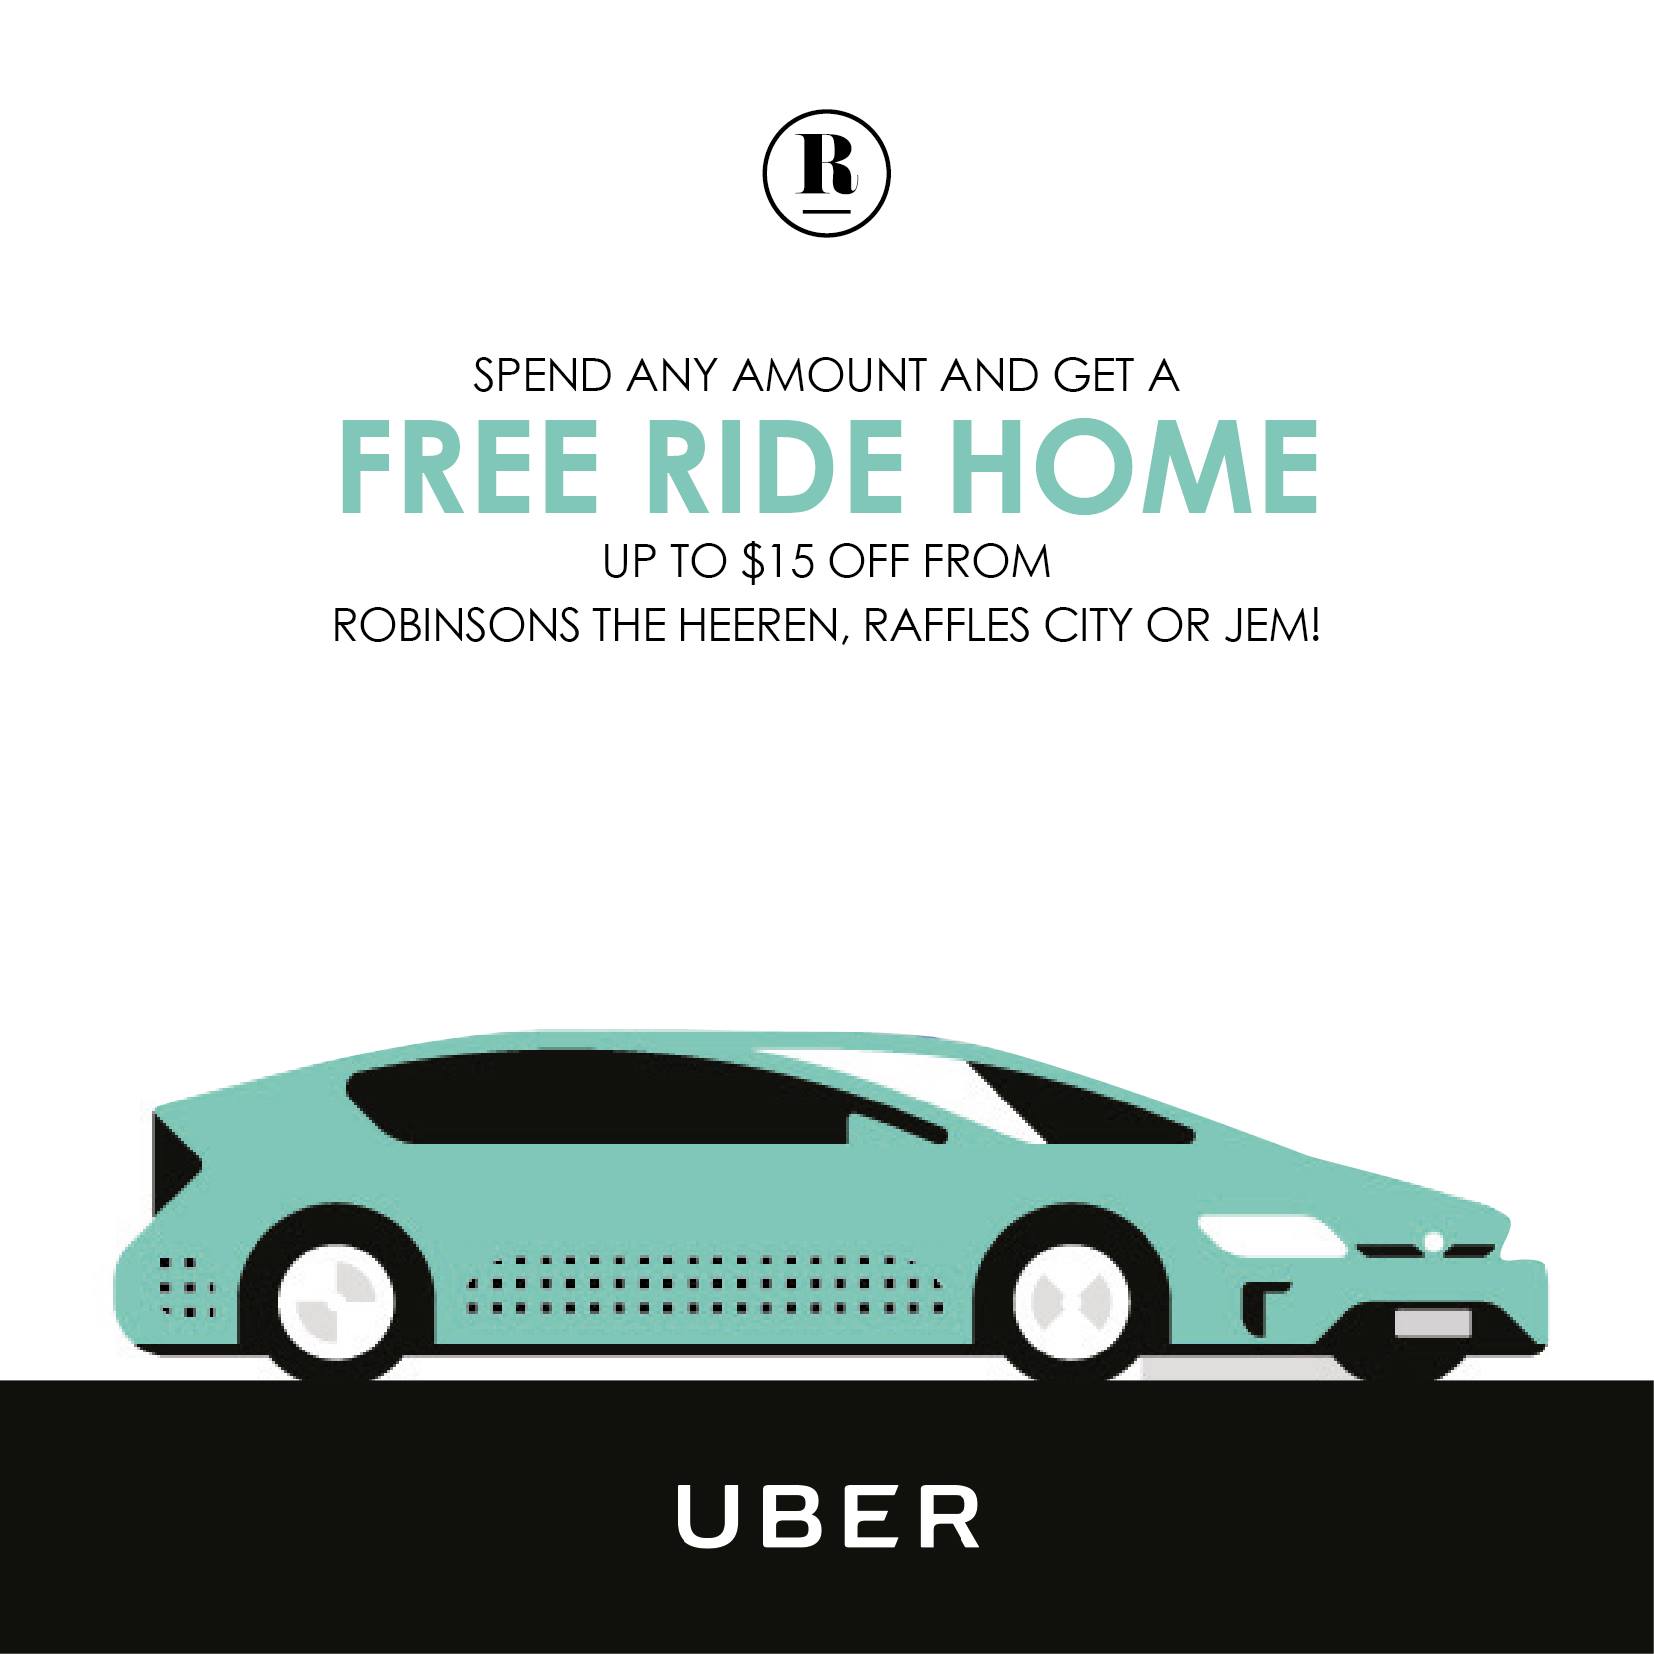 Robinsons FREE Ride Home Singapore Promotion 13 to 17 Jul 2016